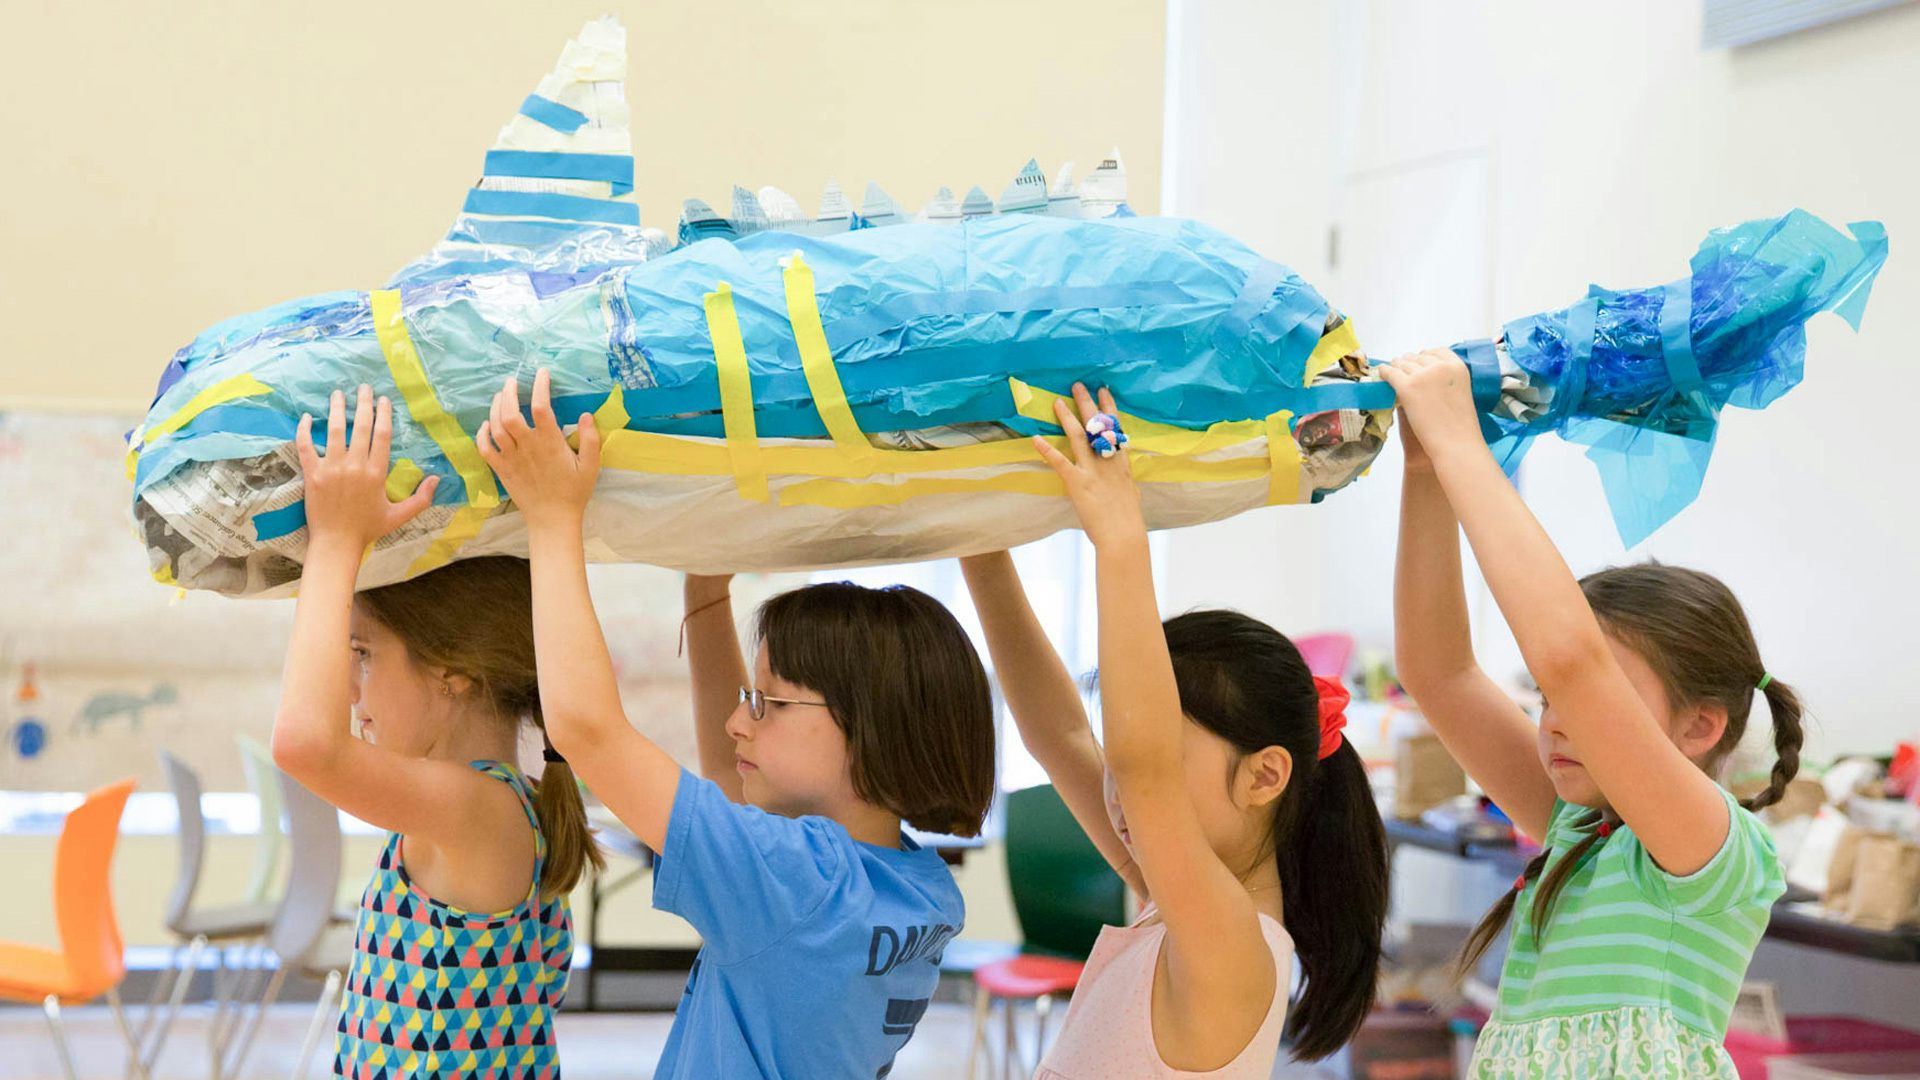 A group of four young children face the left while holding a large, blue, papier-mâché object that has fish/shark-like features above their heads.